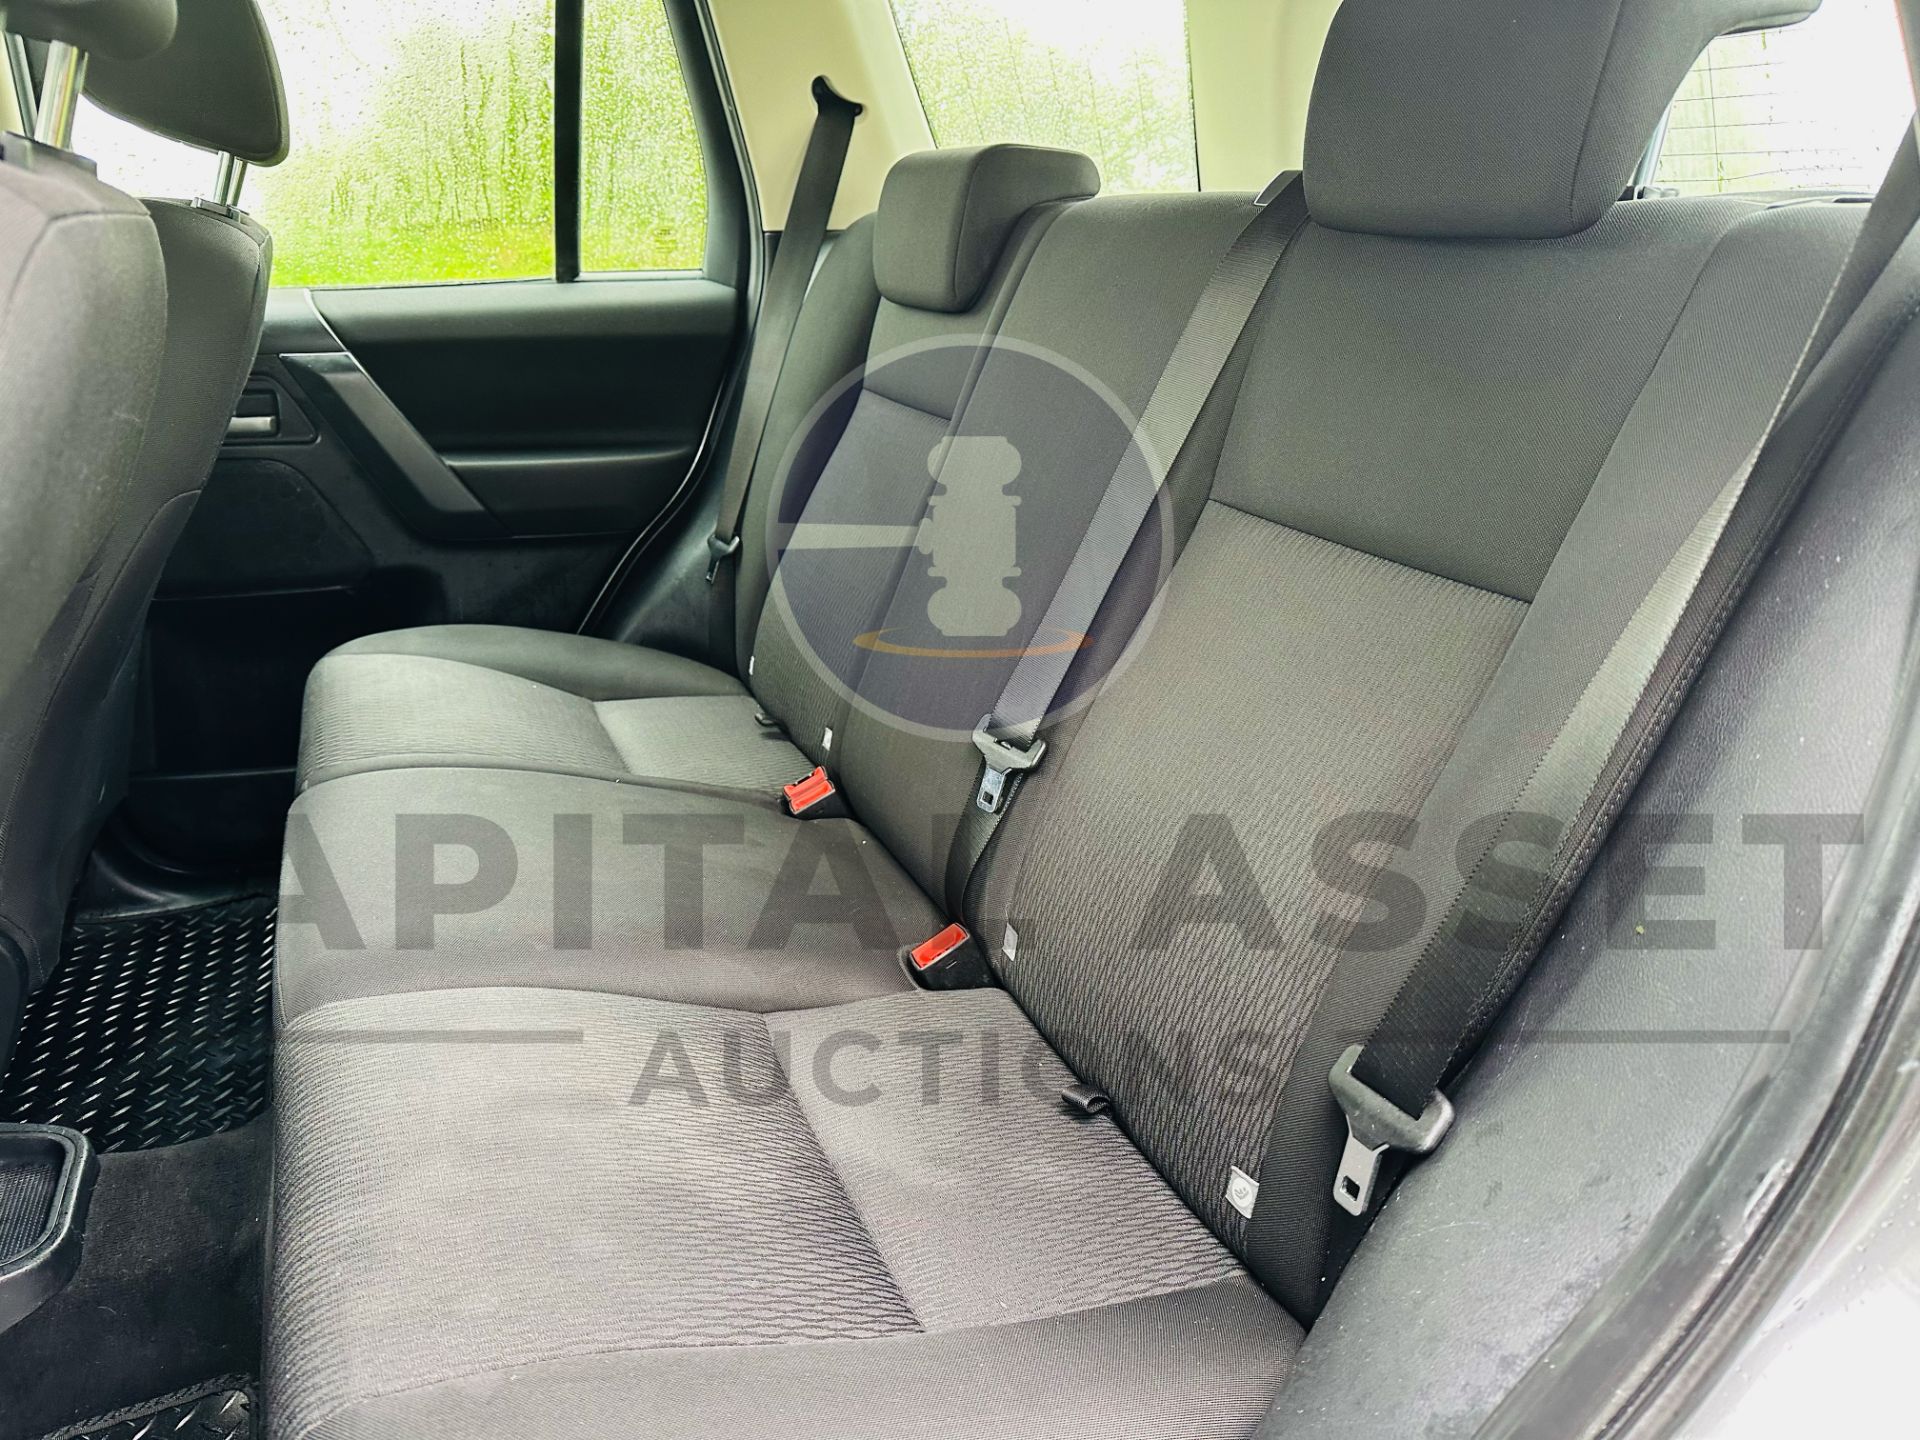 (ON SALE) LANDROVER FREELANDER 2.2TD4 S EDITION "AUTO - 2012 MODEL - AIR CON - FSH - Image 17 of 33